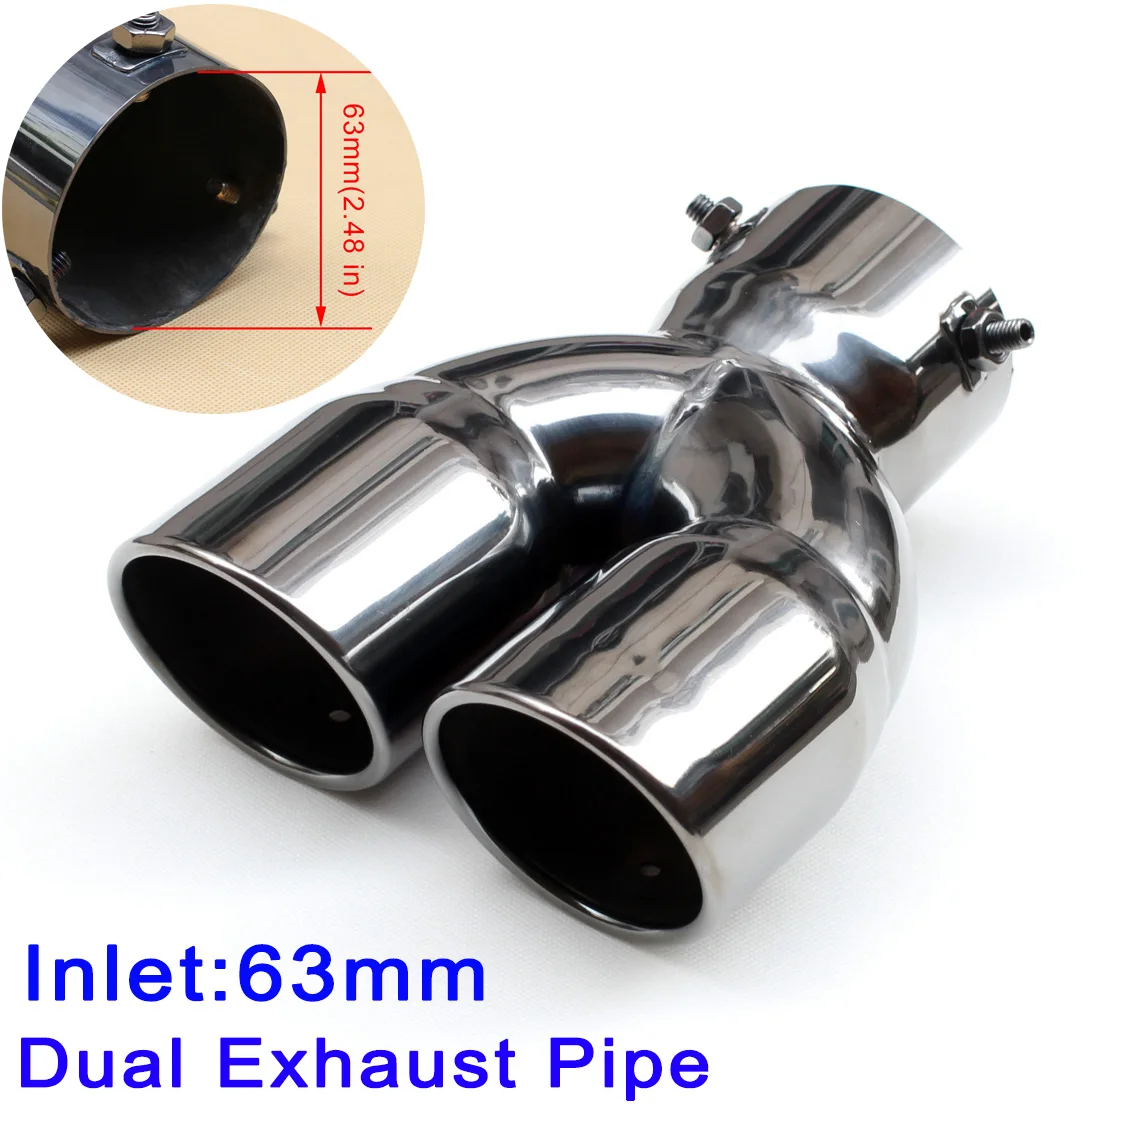 

Muffler Silencer Tailpipe Cover Inlet 63mm 2.48" Stainless Steel Tail Rear Pipe Tip Dual Outlet Exhaust Accessories